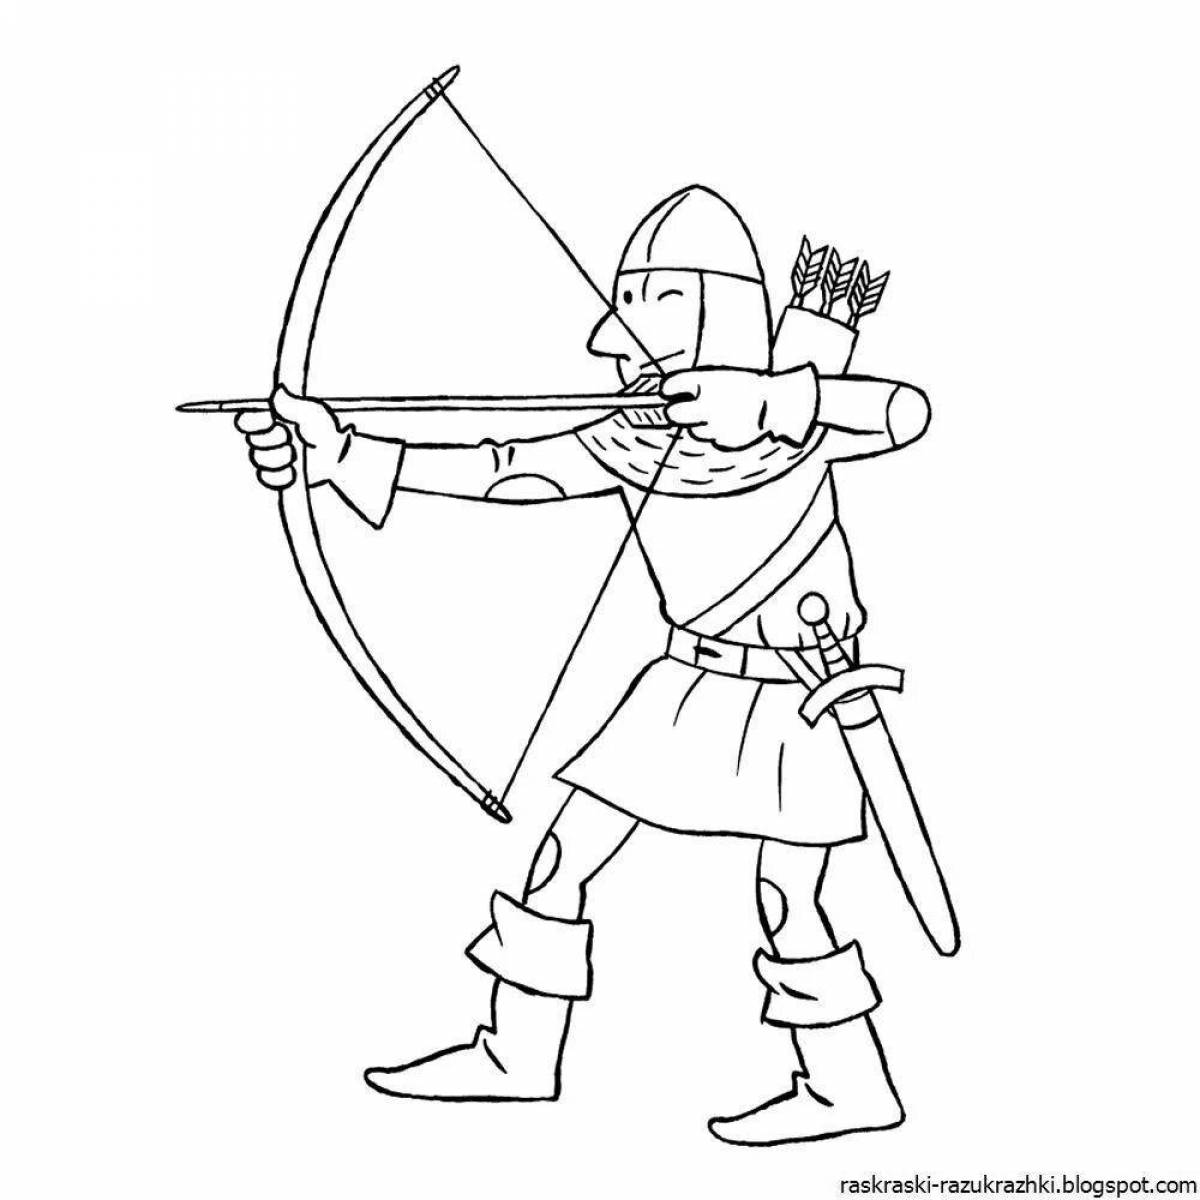 Coloring book daring archer